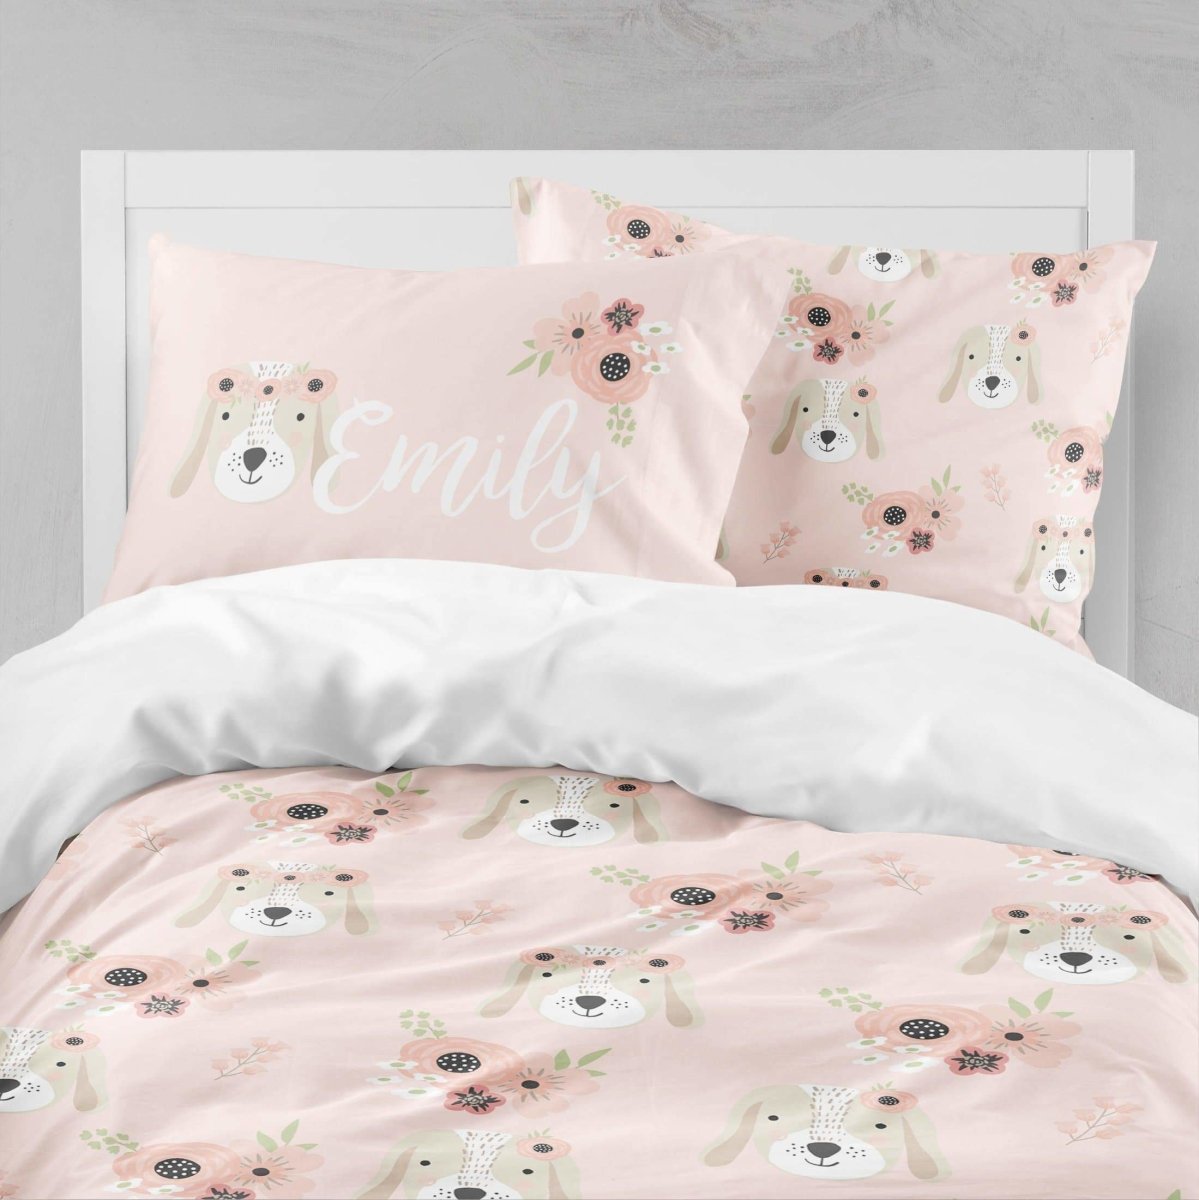 Personalized Puppy Kids Bedding Set (Comforter or Duvet Cover) - text, ,